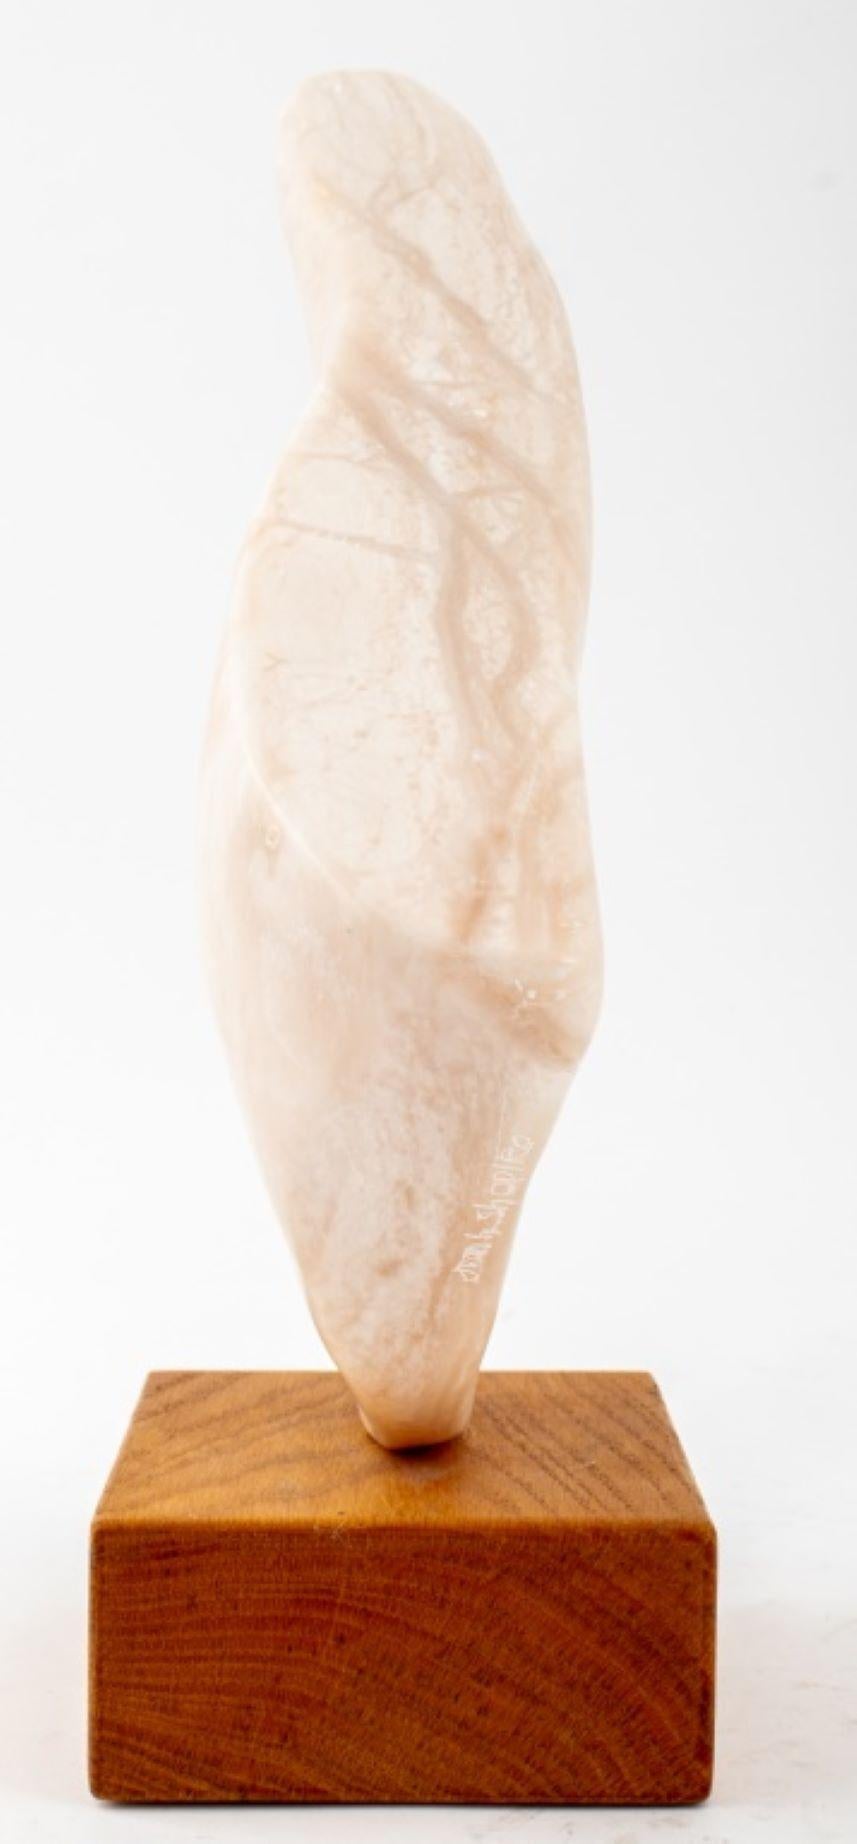 Joan Hyde Shapiro (American, XX-XXI) pale pink alabaster stone sculpture of an abstract organic freeform shape with a rectangular cutout, signed to side, mounted on a wood base. Overall: 13.5